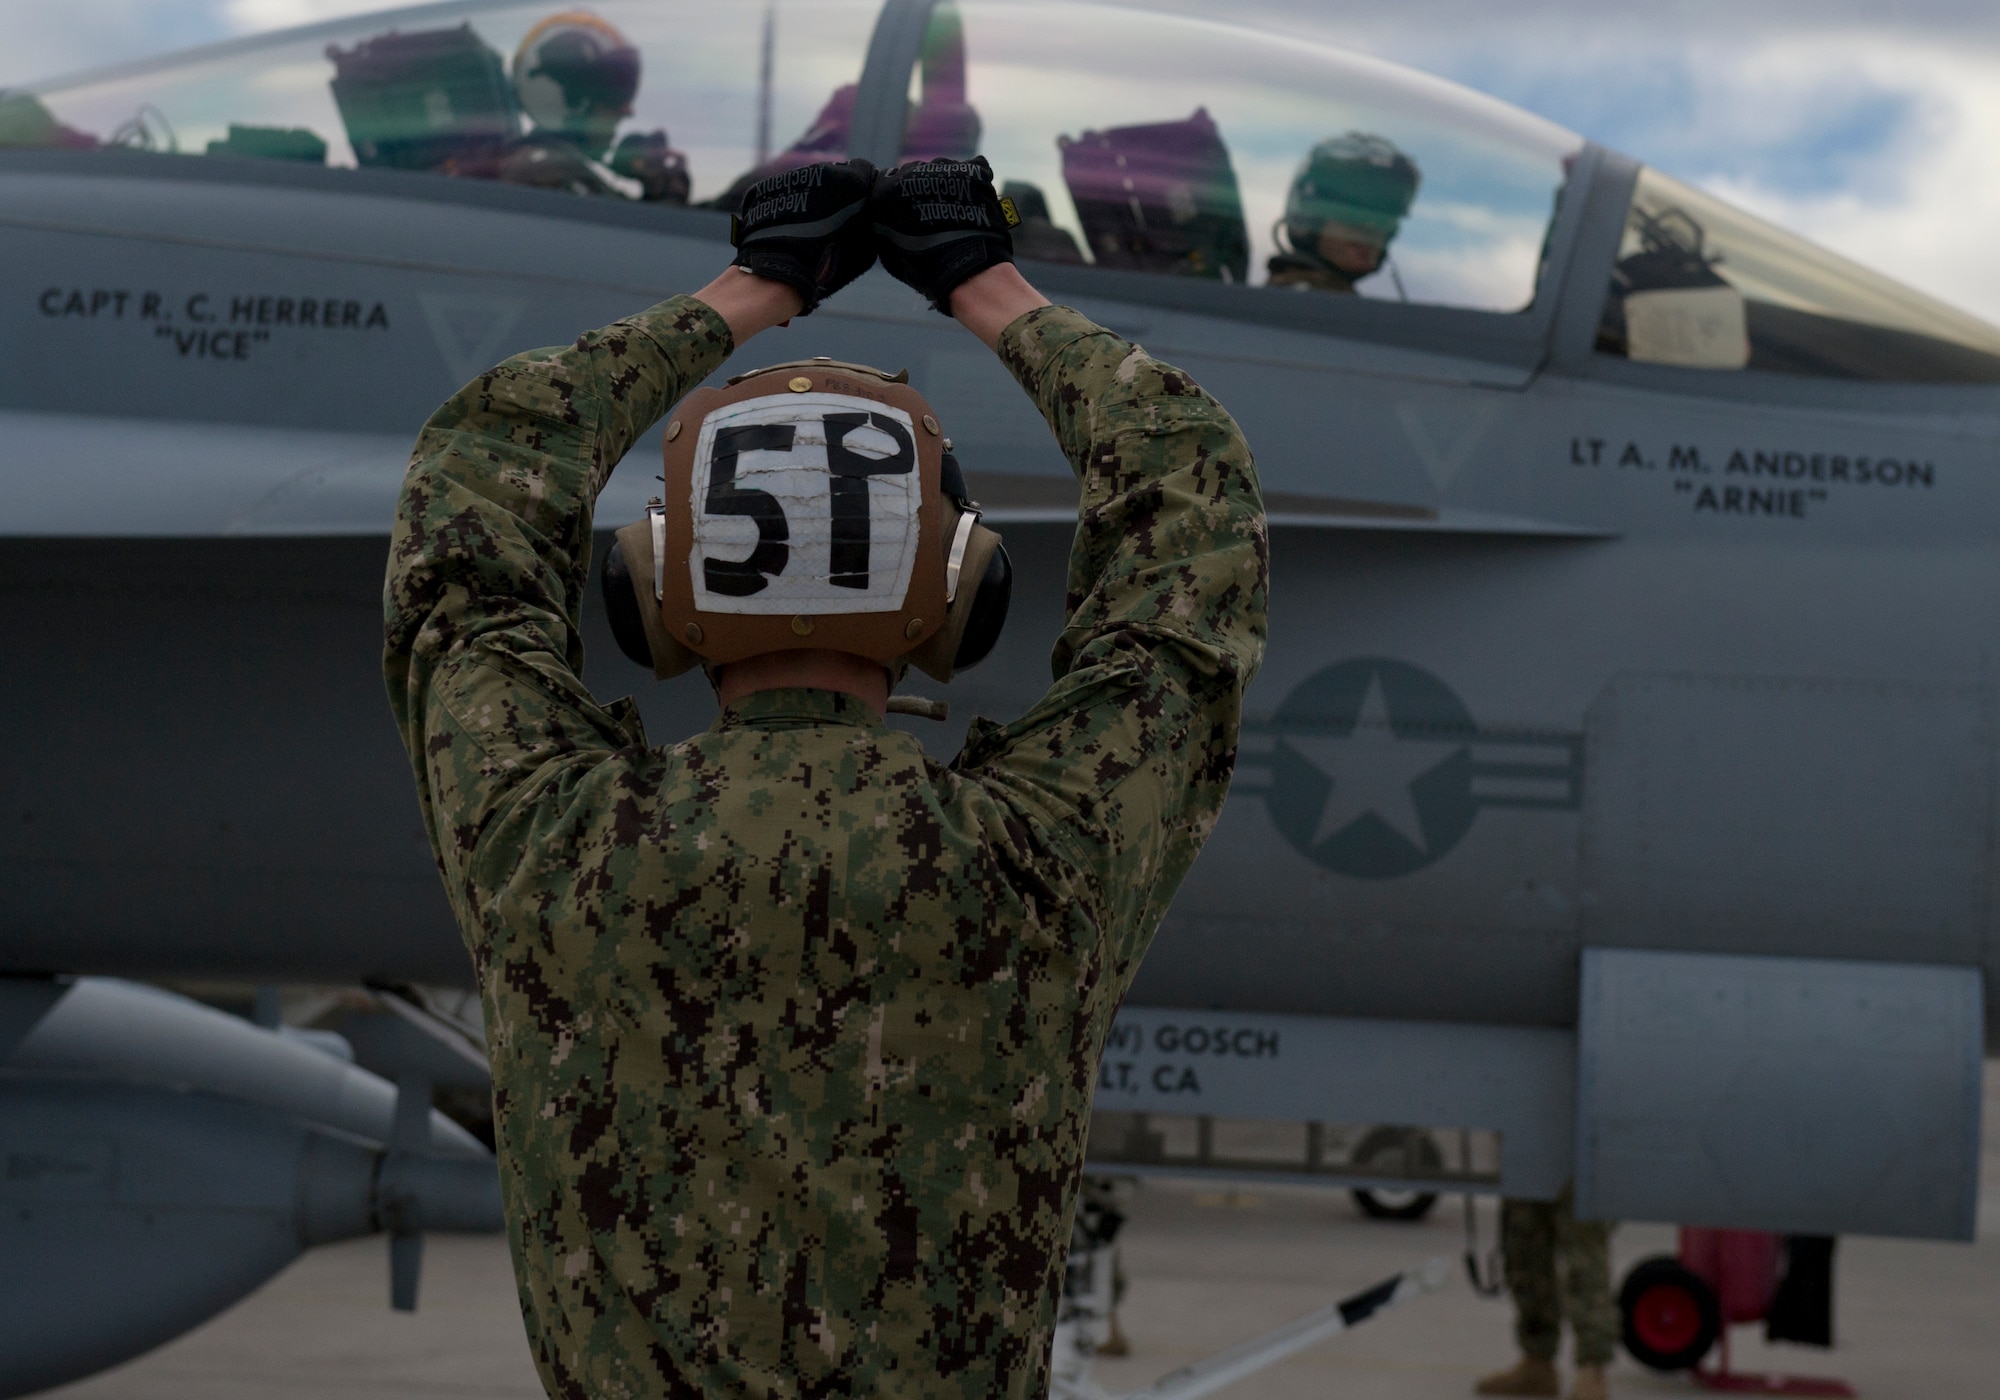 United States Navy Airman Ryan Smith, VAQ-138 plane captain from Naval Air Station Whidbey Island, Wash., marshals in an EA-18G Growler during Red Flag 16-1, Jan. 29, 2016 at Nellis AFB, Nev. Red Flag brings together units from all over the world including multiple military branches and countries. One thing they all have in common is the need for experienced maintainers. (U.S. Air Force photo by Senior Airman Alex Fox Echols III/Released)